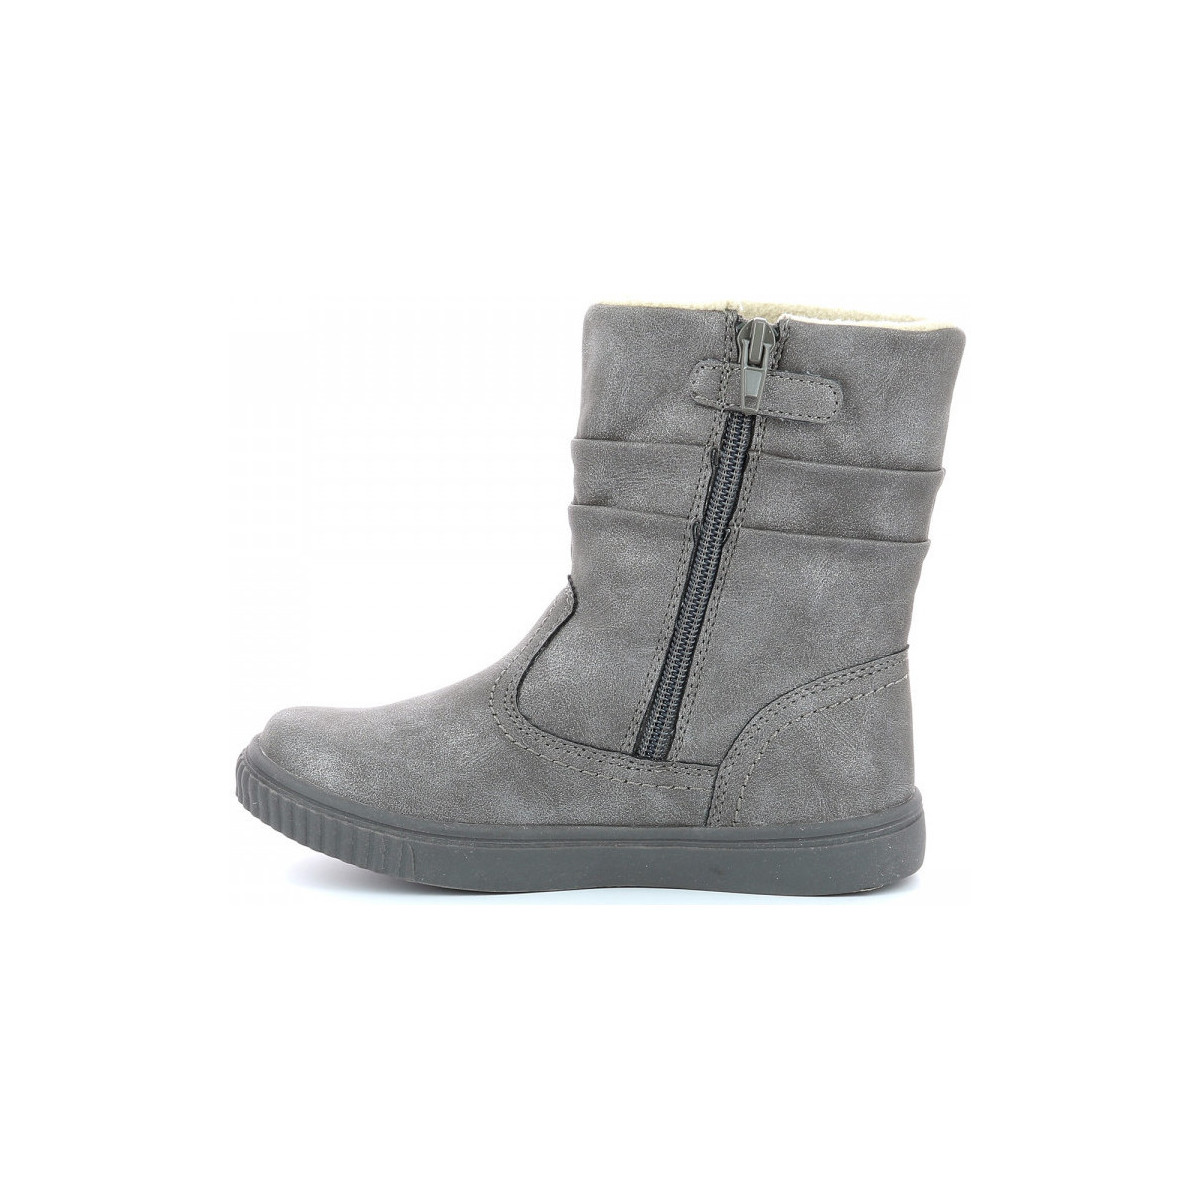 Kickers Gris Rumby 3mnYYfya